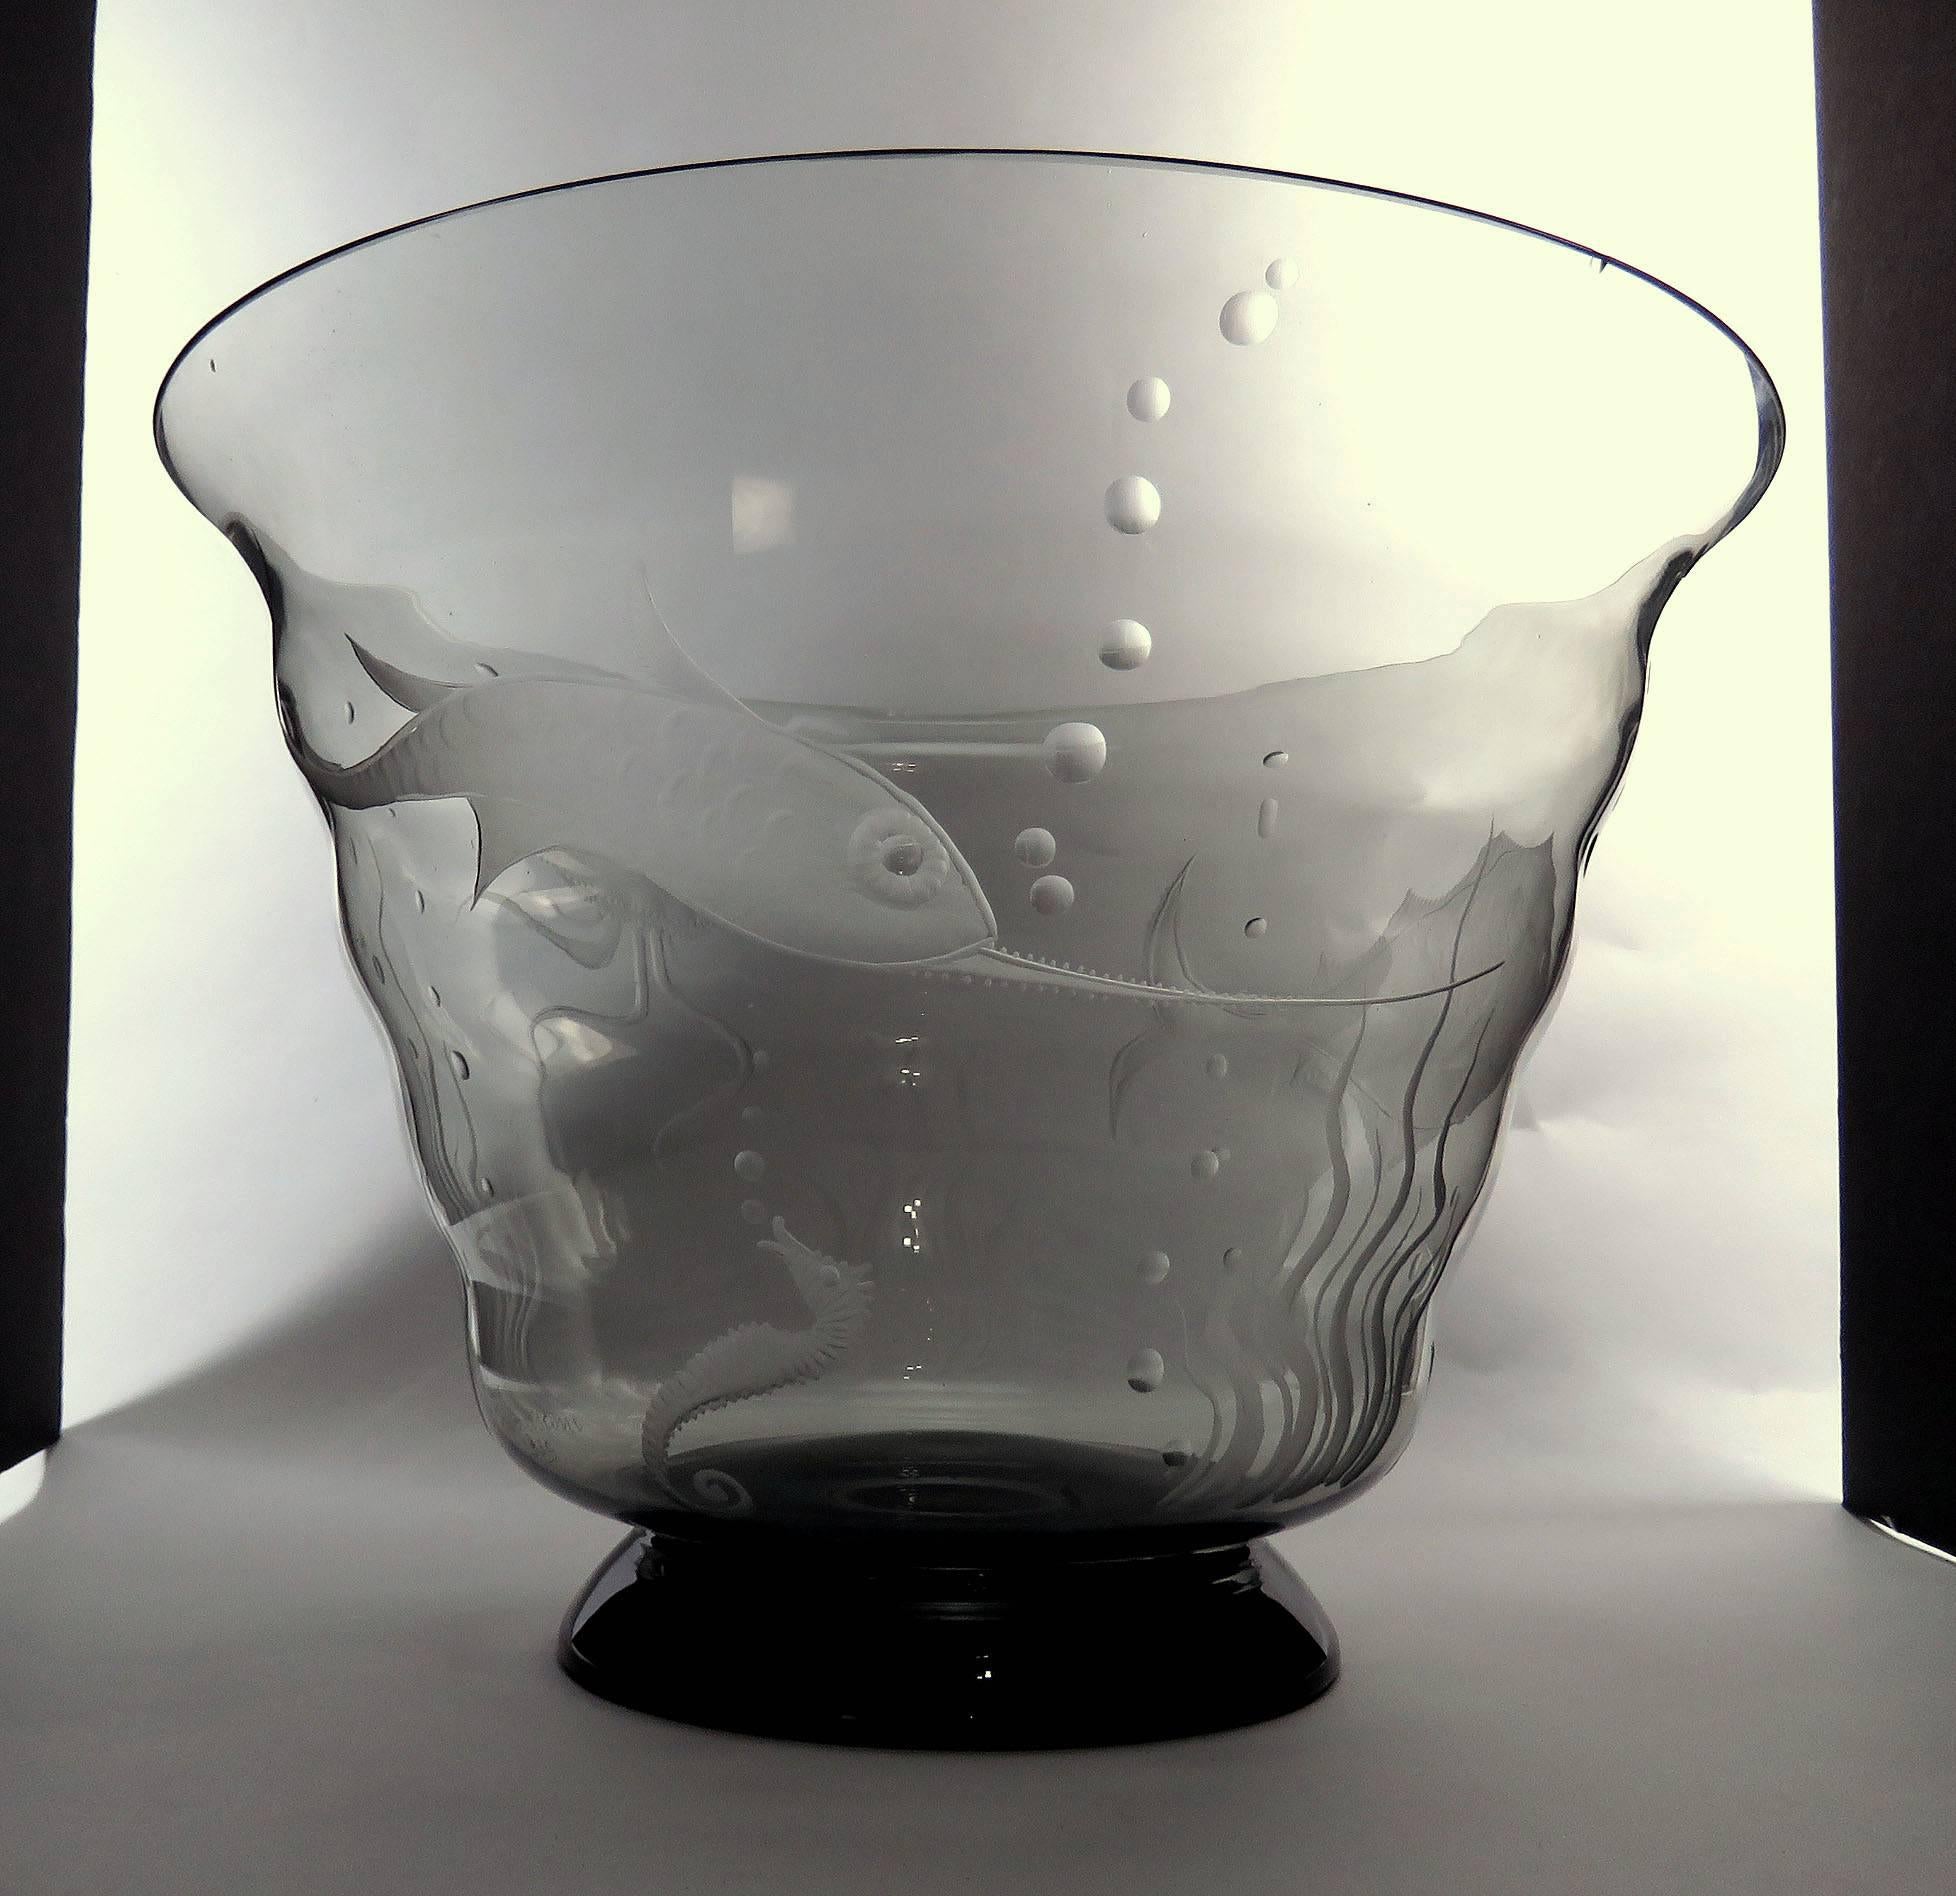 Italian Handblown Murano Engraved Glass Bowl by Gino Francesconi 'S.A.L.I.R.' Dated 1939